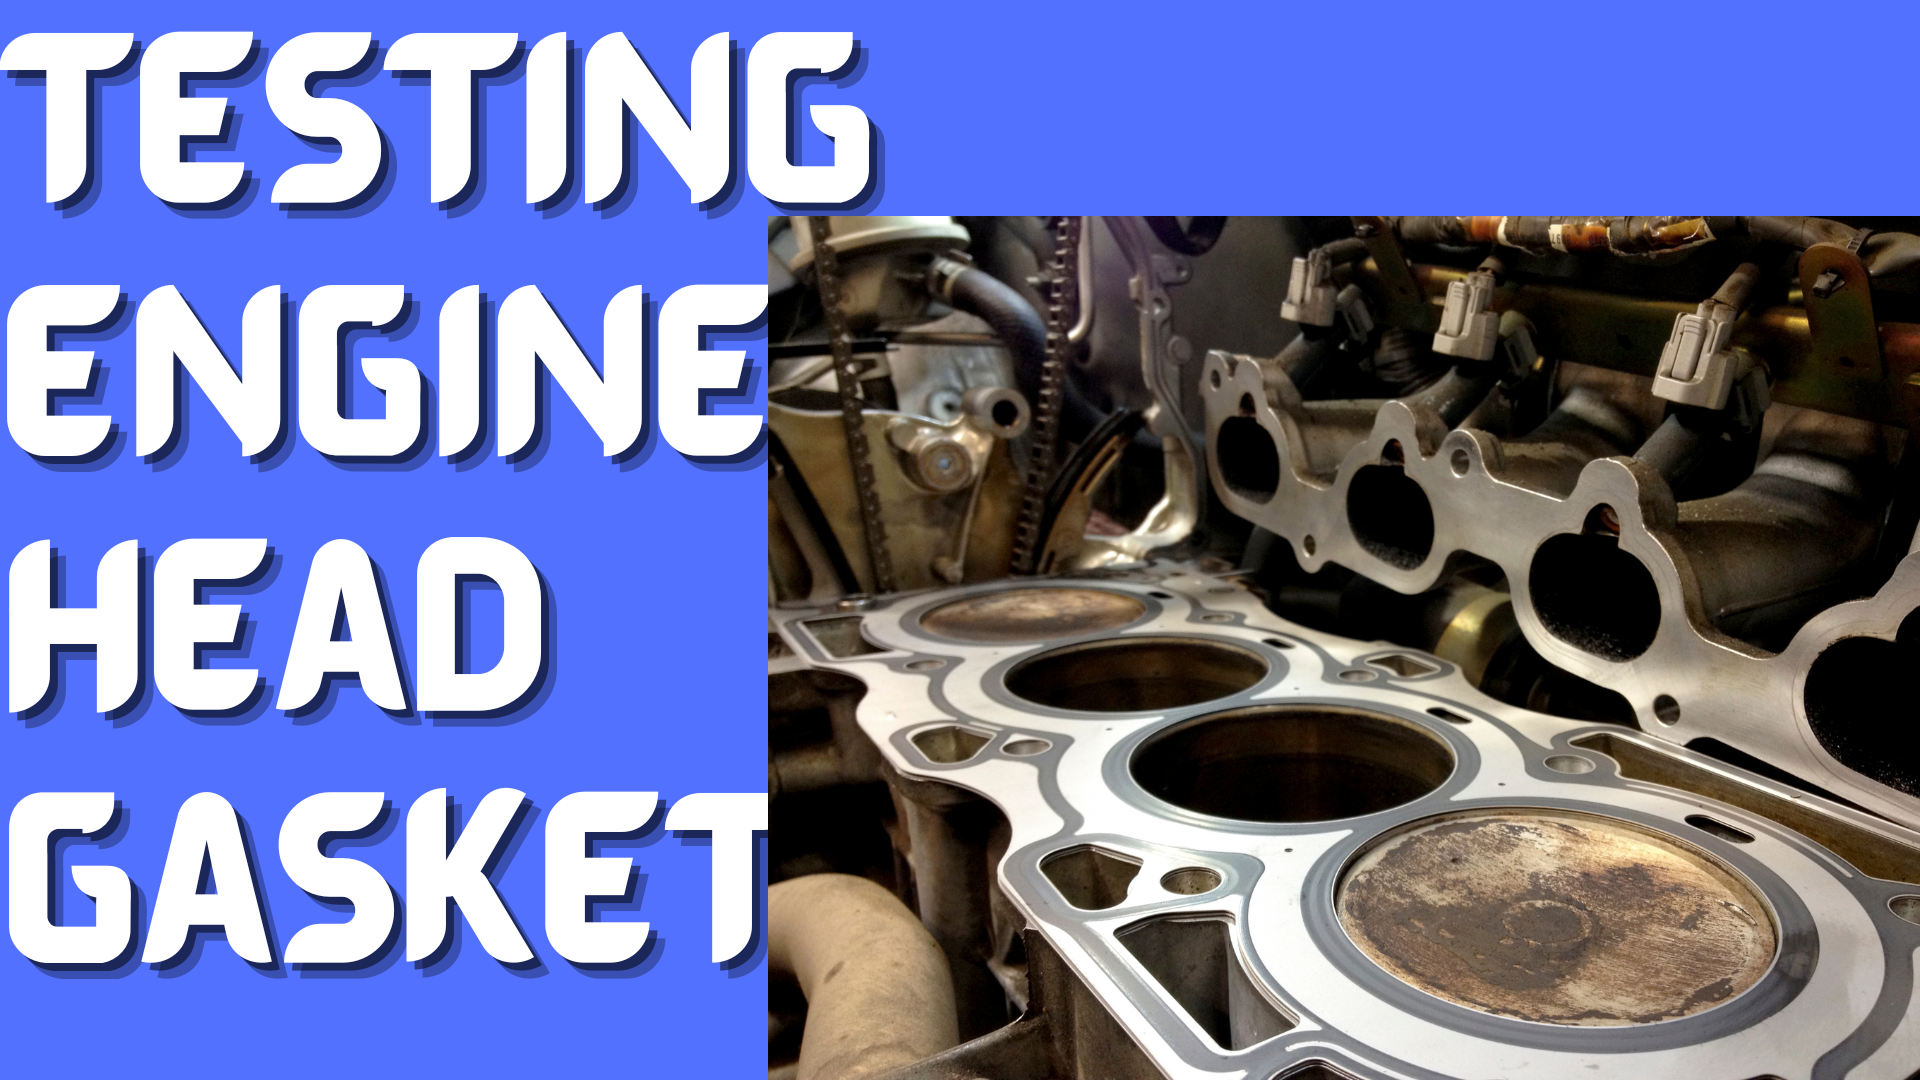 Testing Condition of Engine Head Gasket For Efficiency